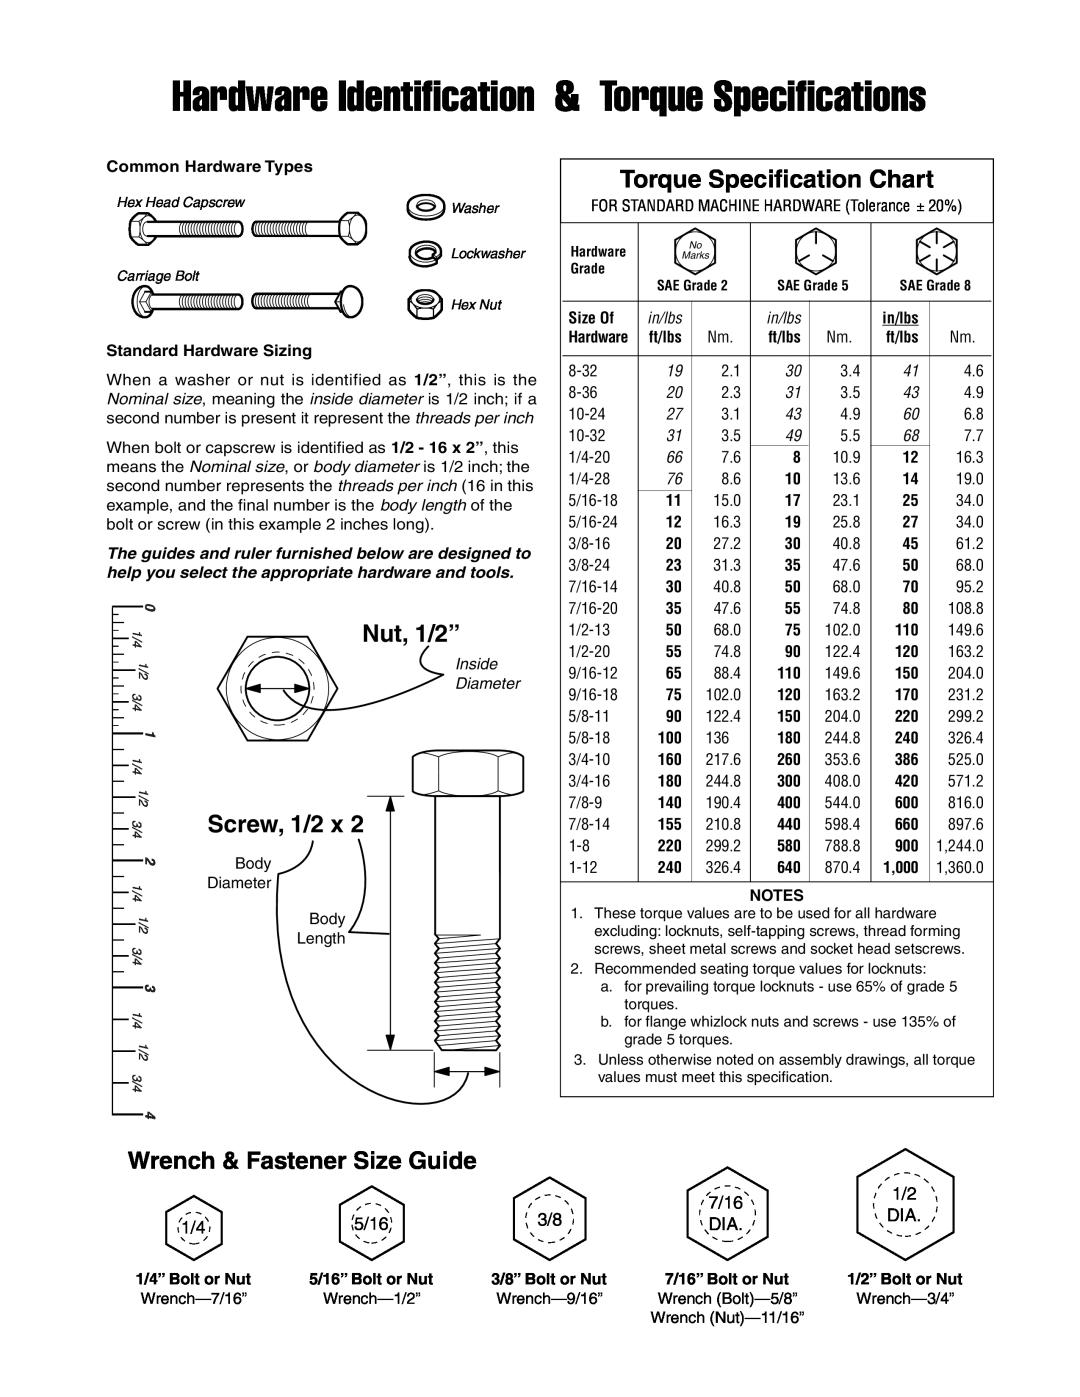 Snapper 1693755 Torque Specification Chart, Wrench & Fastener Size Guide, Hardware Identification & Torque Specifications 